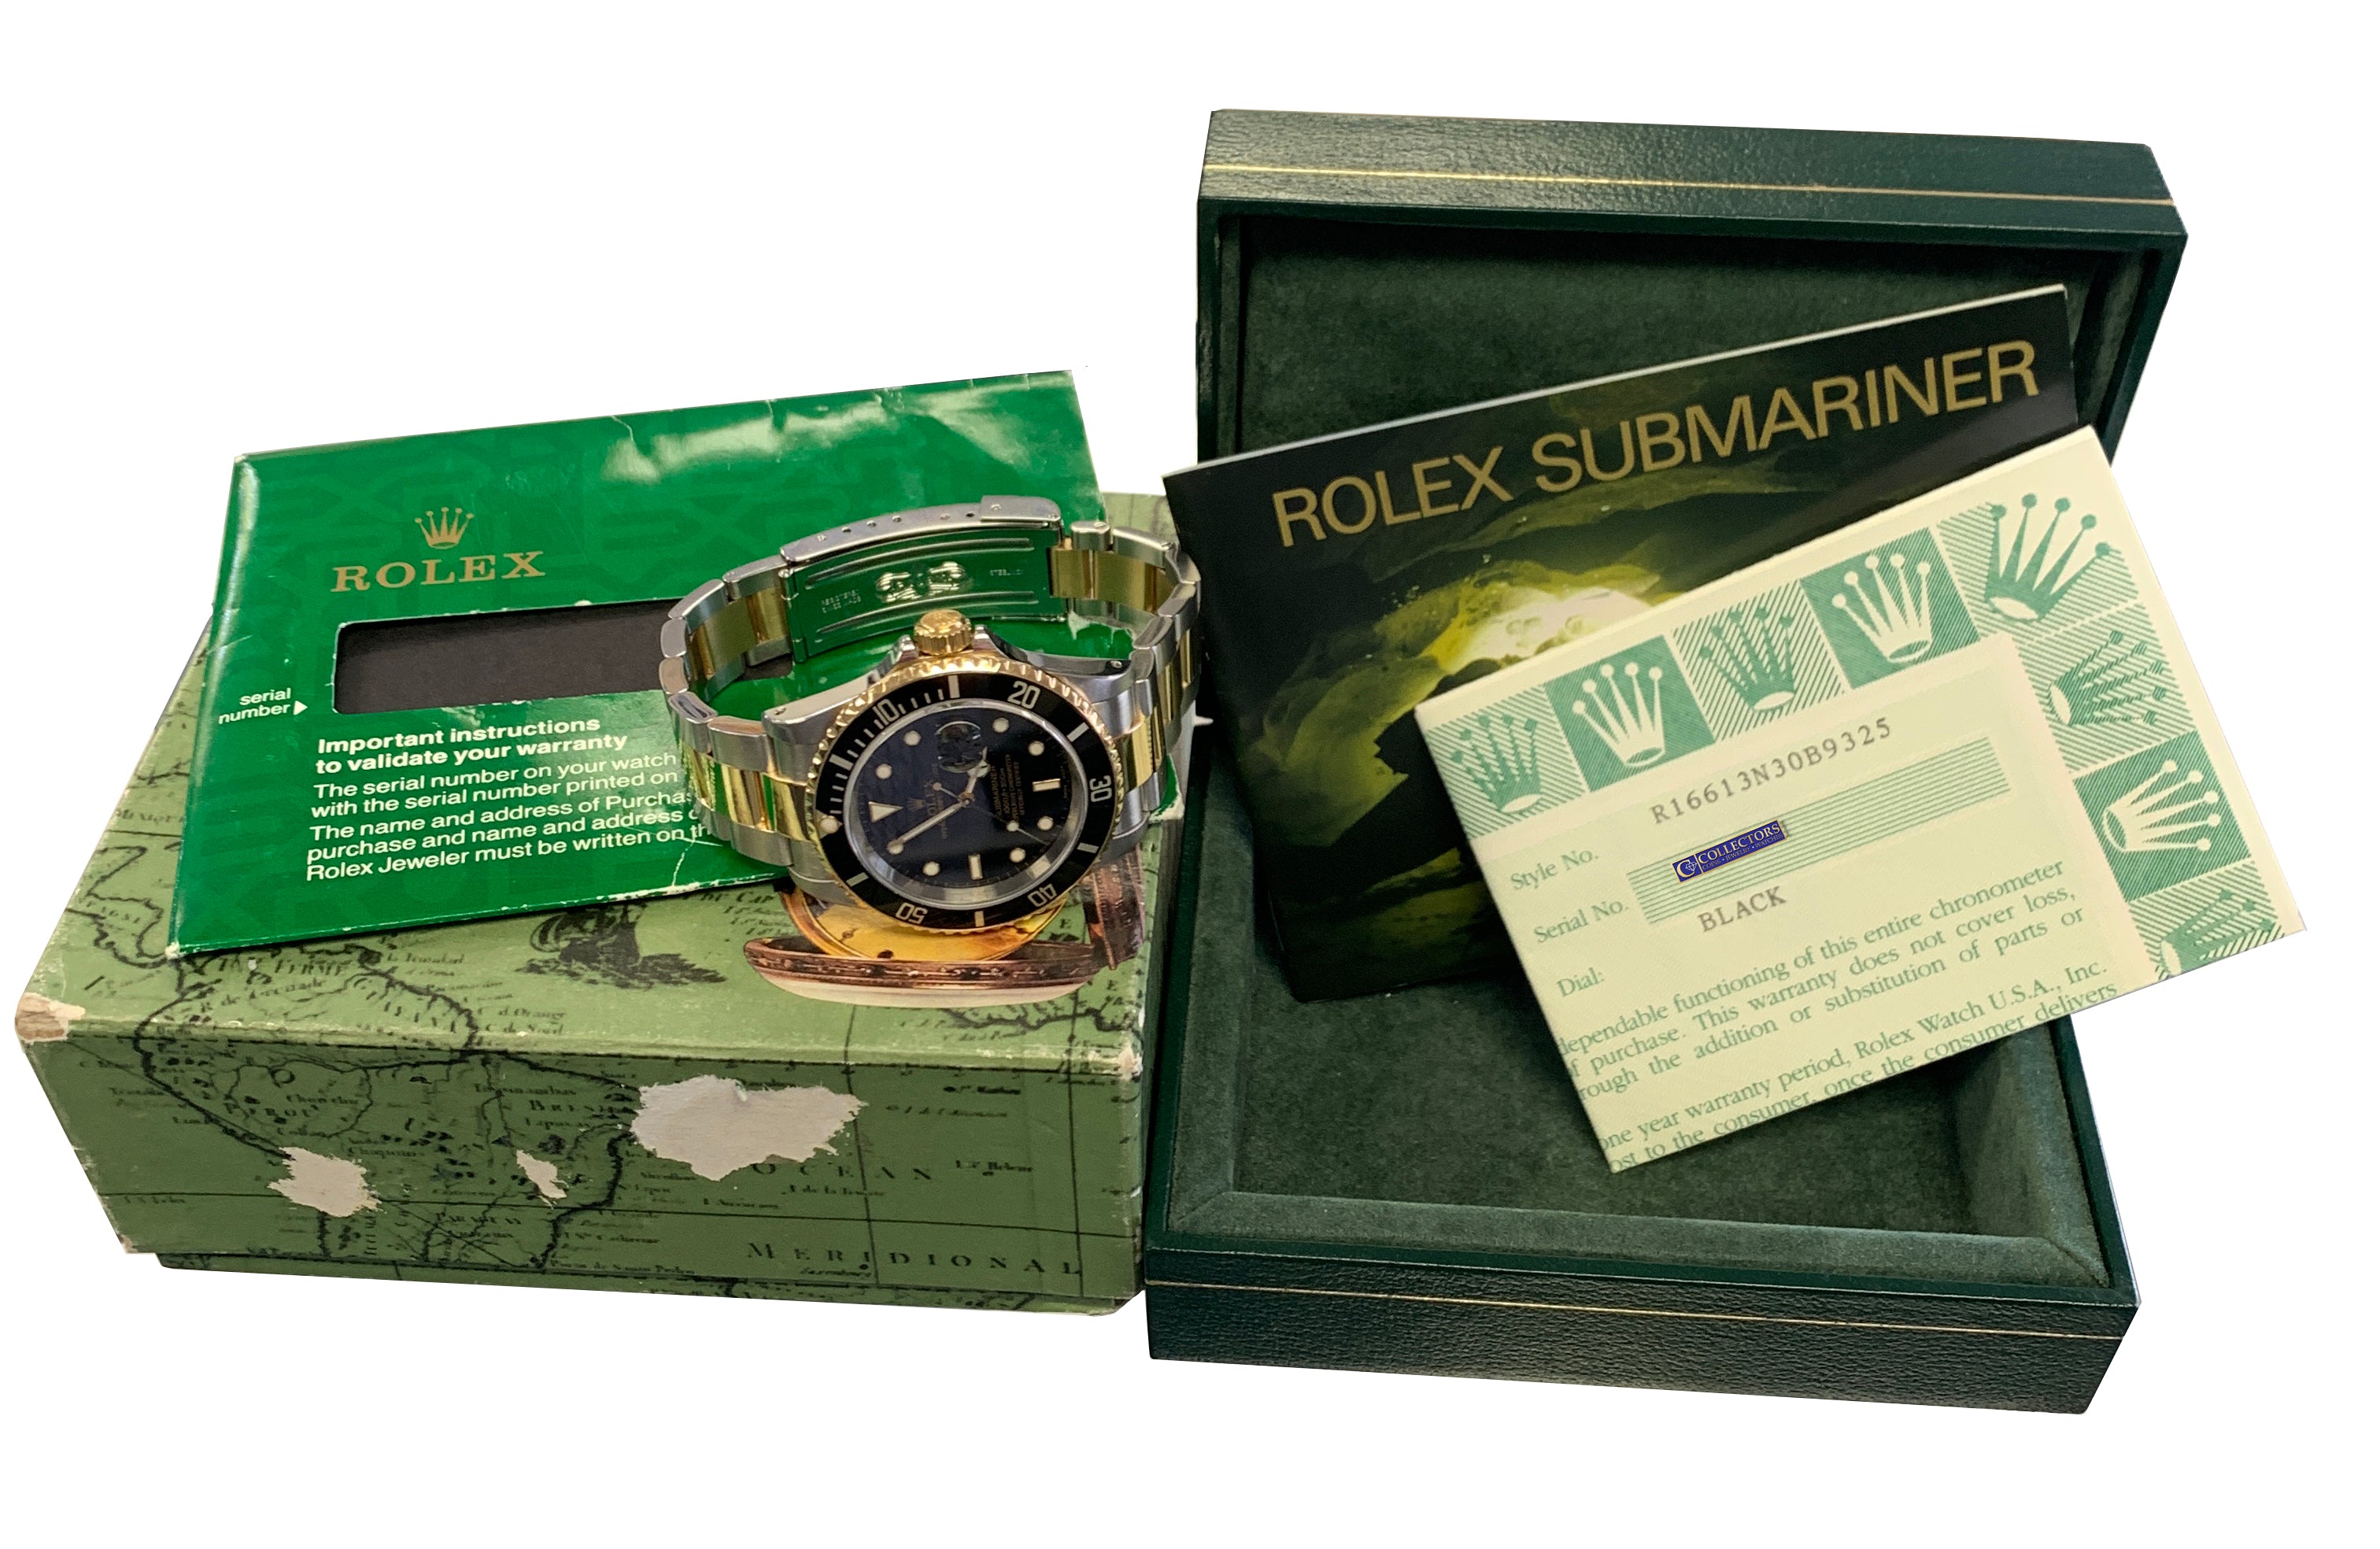 MINT 2002 Rolex Submariner 16613 Two-Tone Stainless Black Dive 40mm Watch SEL